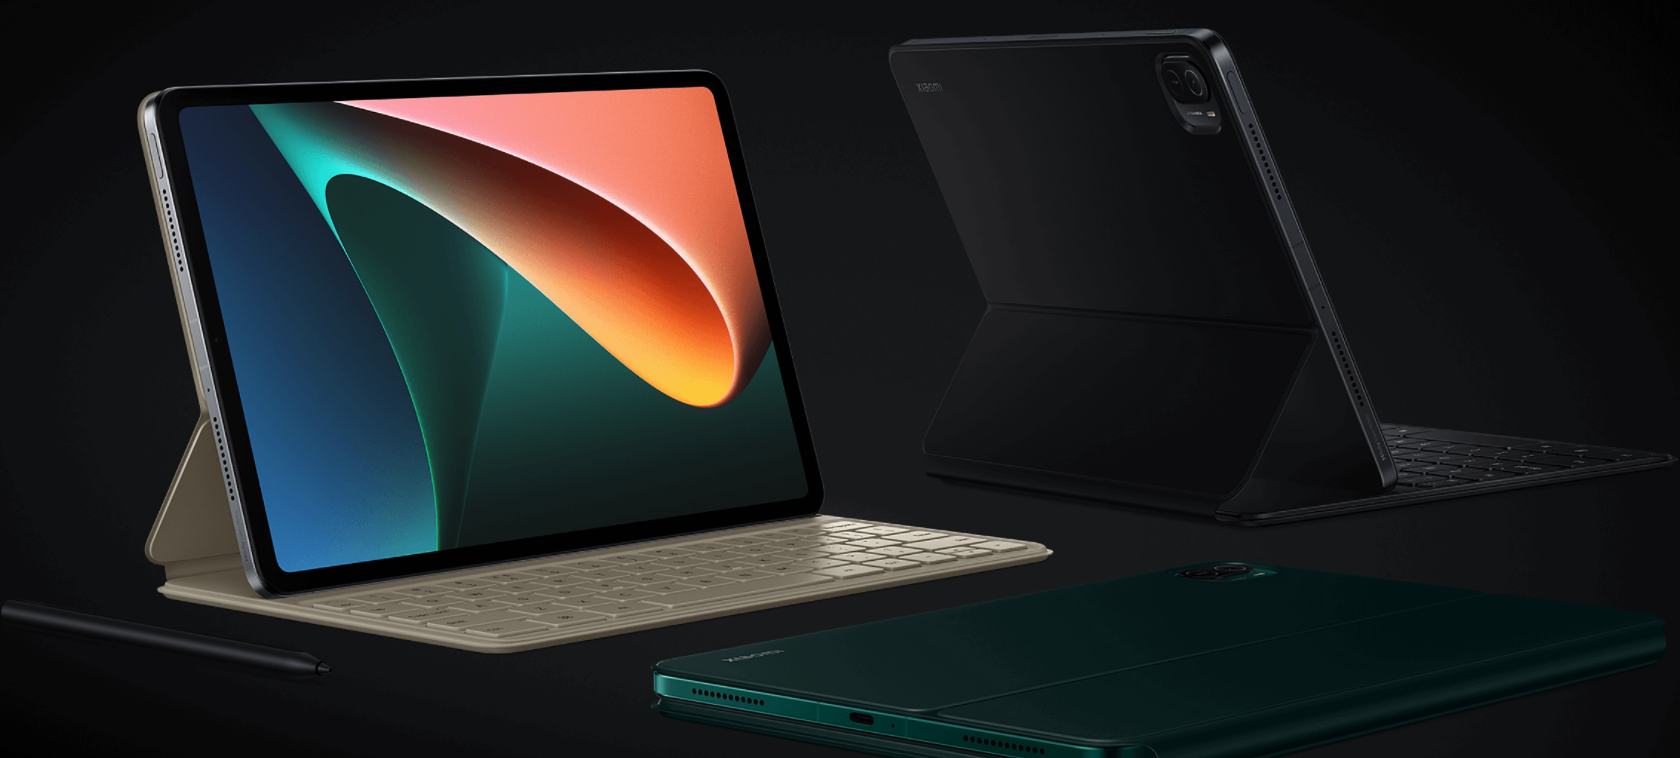 Xiaomi Mi Pad 5 and Mi Pad 5 Pro will be available in Europe in September